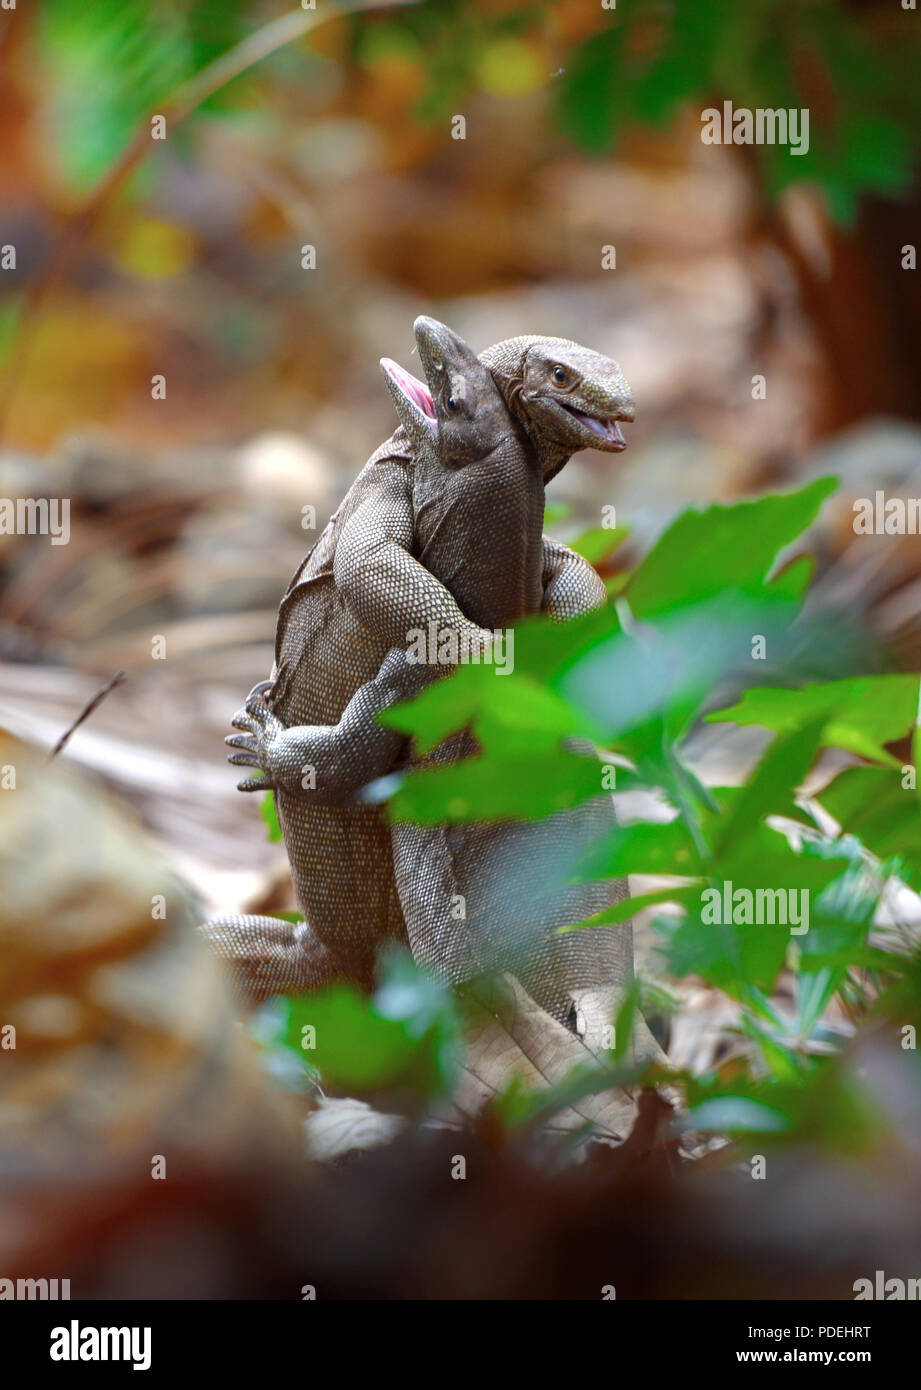 two iguana animals in love or fight Stock Photo